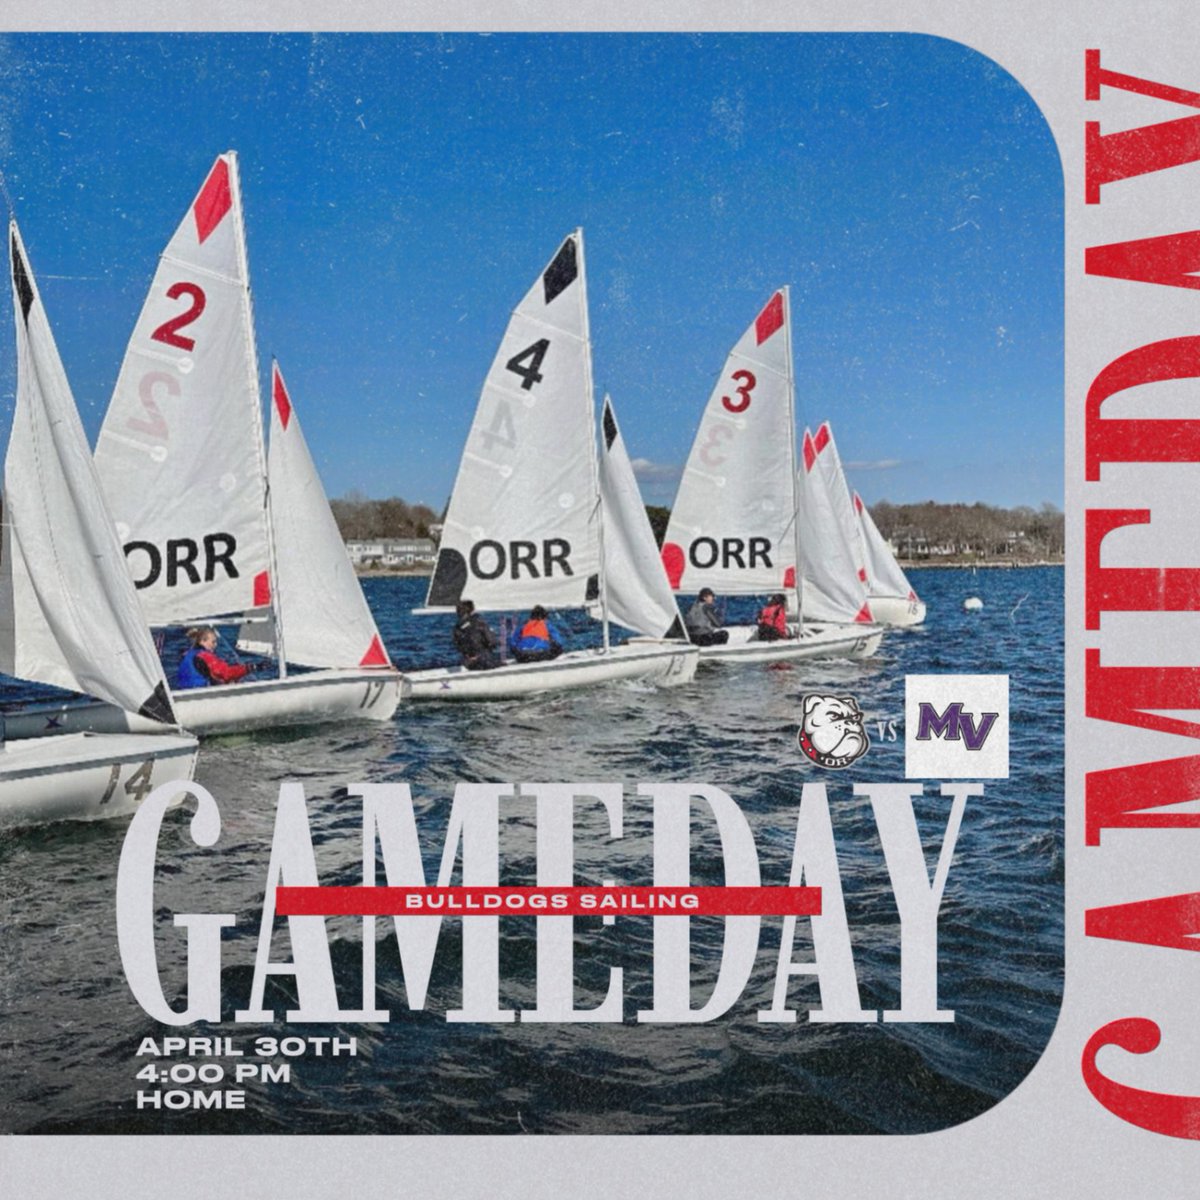 ORR Sailing has a game against Martha's Vineyard today at 4:00. Lets go dogs!